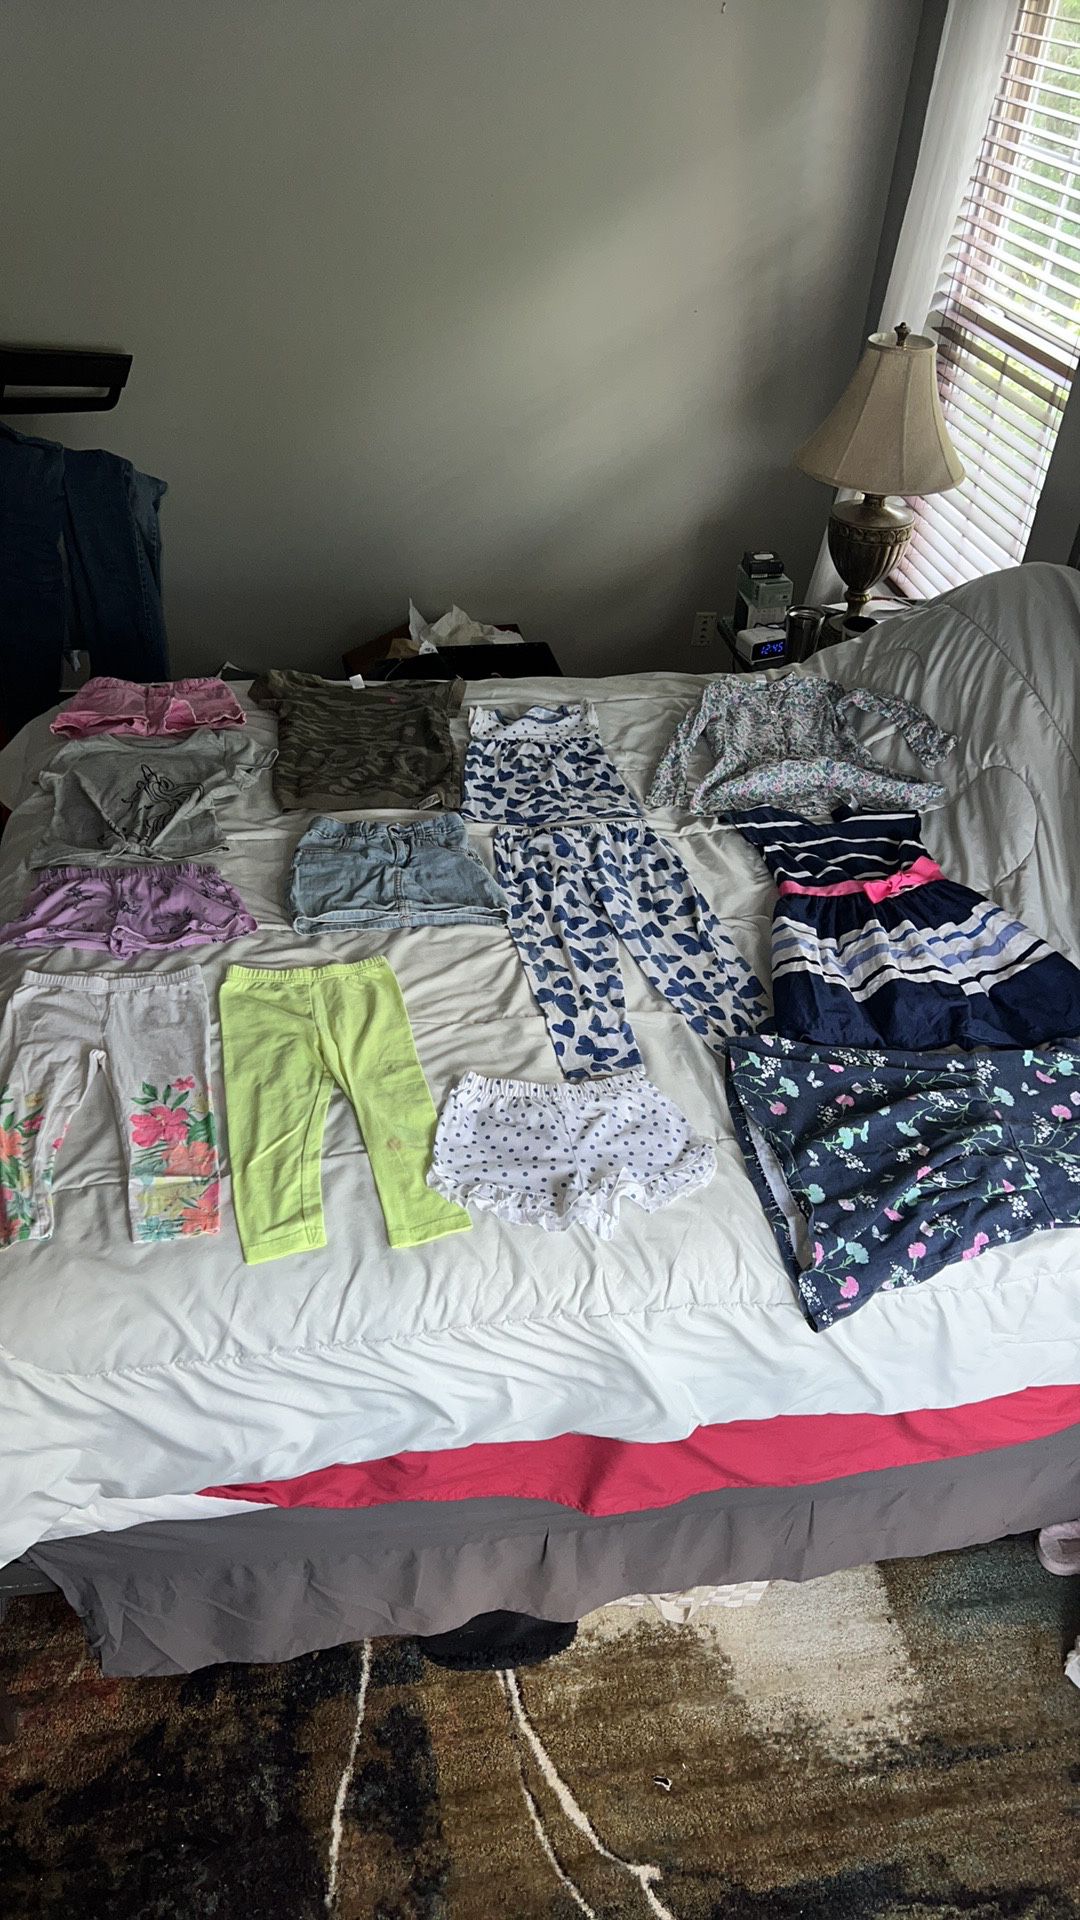 Carters girls size 6/6x clothes. Dresses, leggings, sorts, skirt, pjs. Some are faded/have light stains/piling - see pics